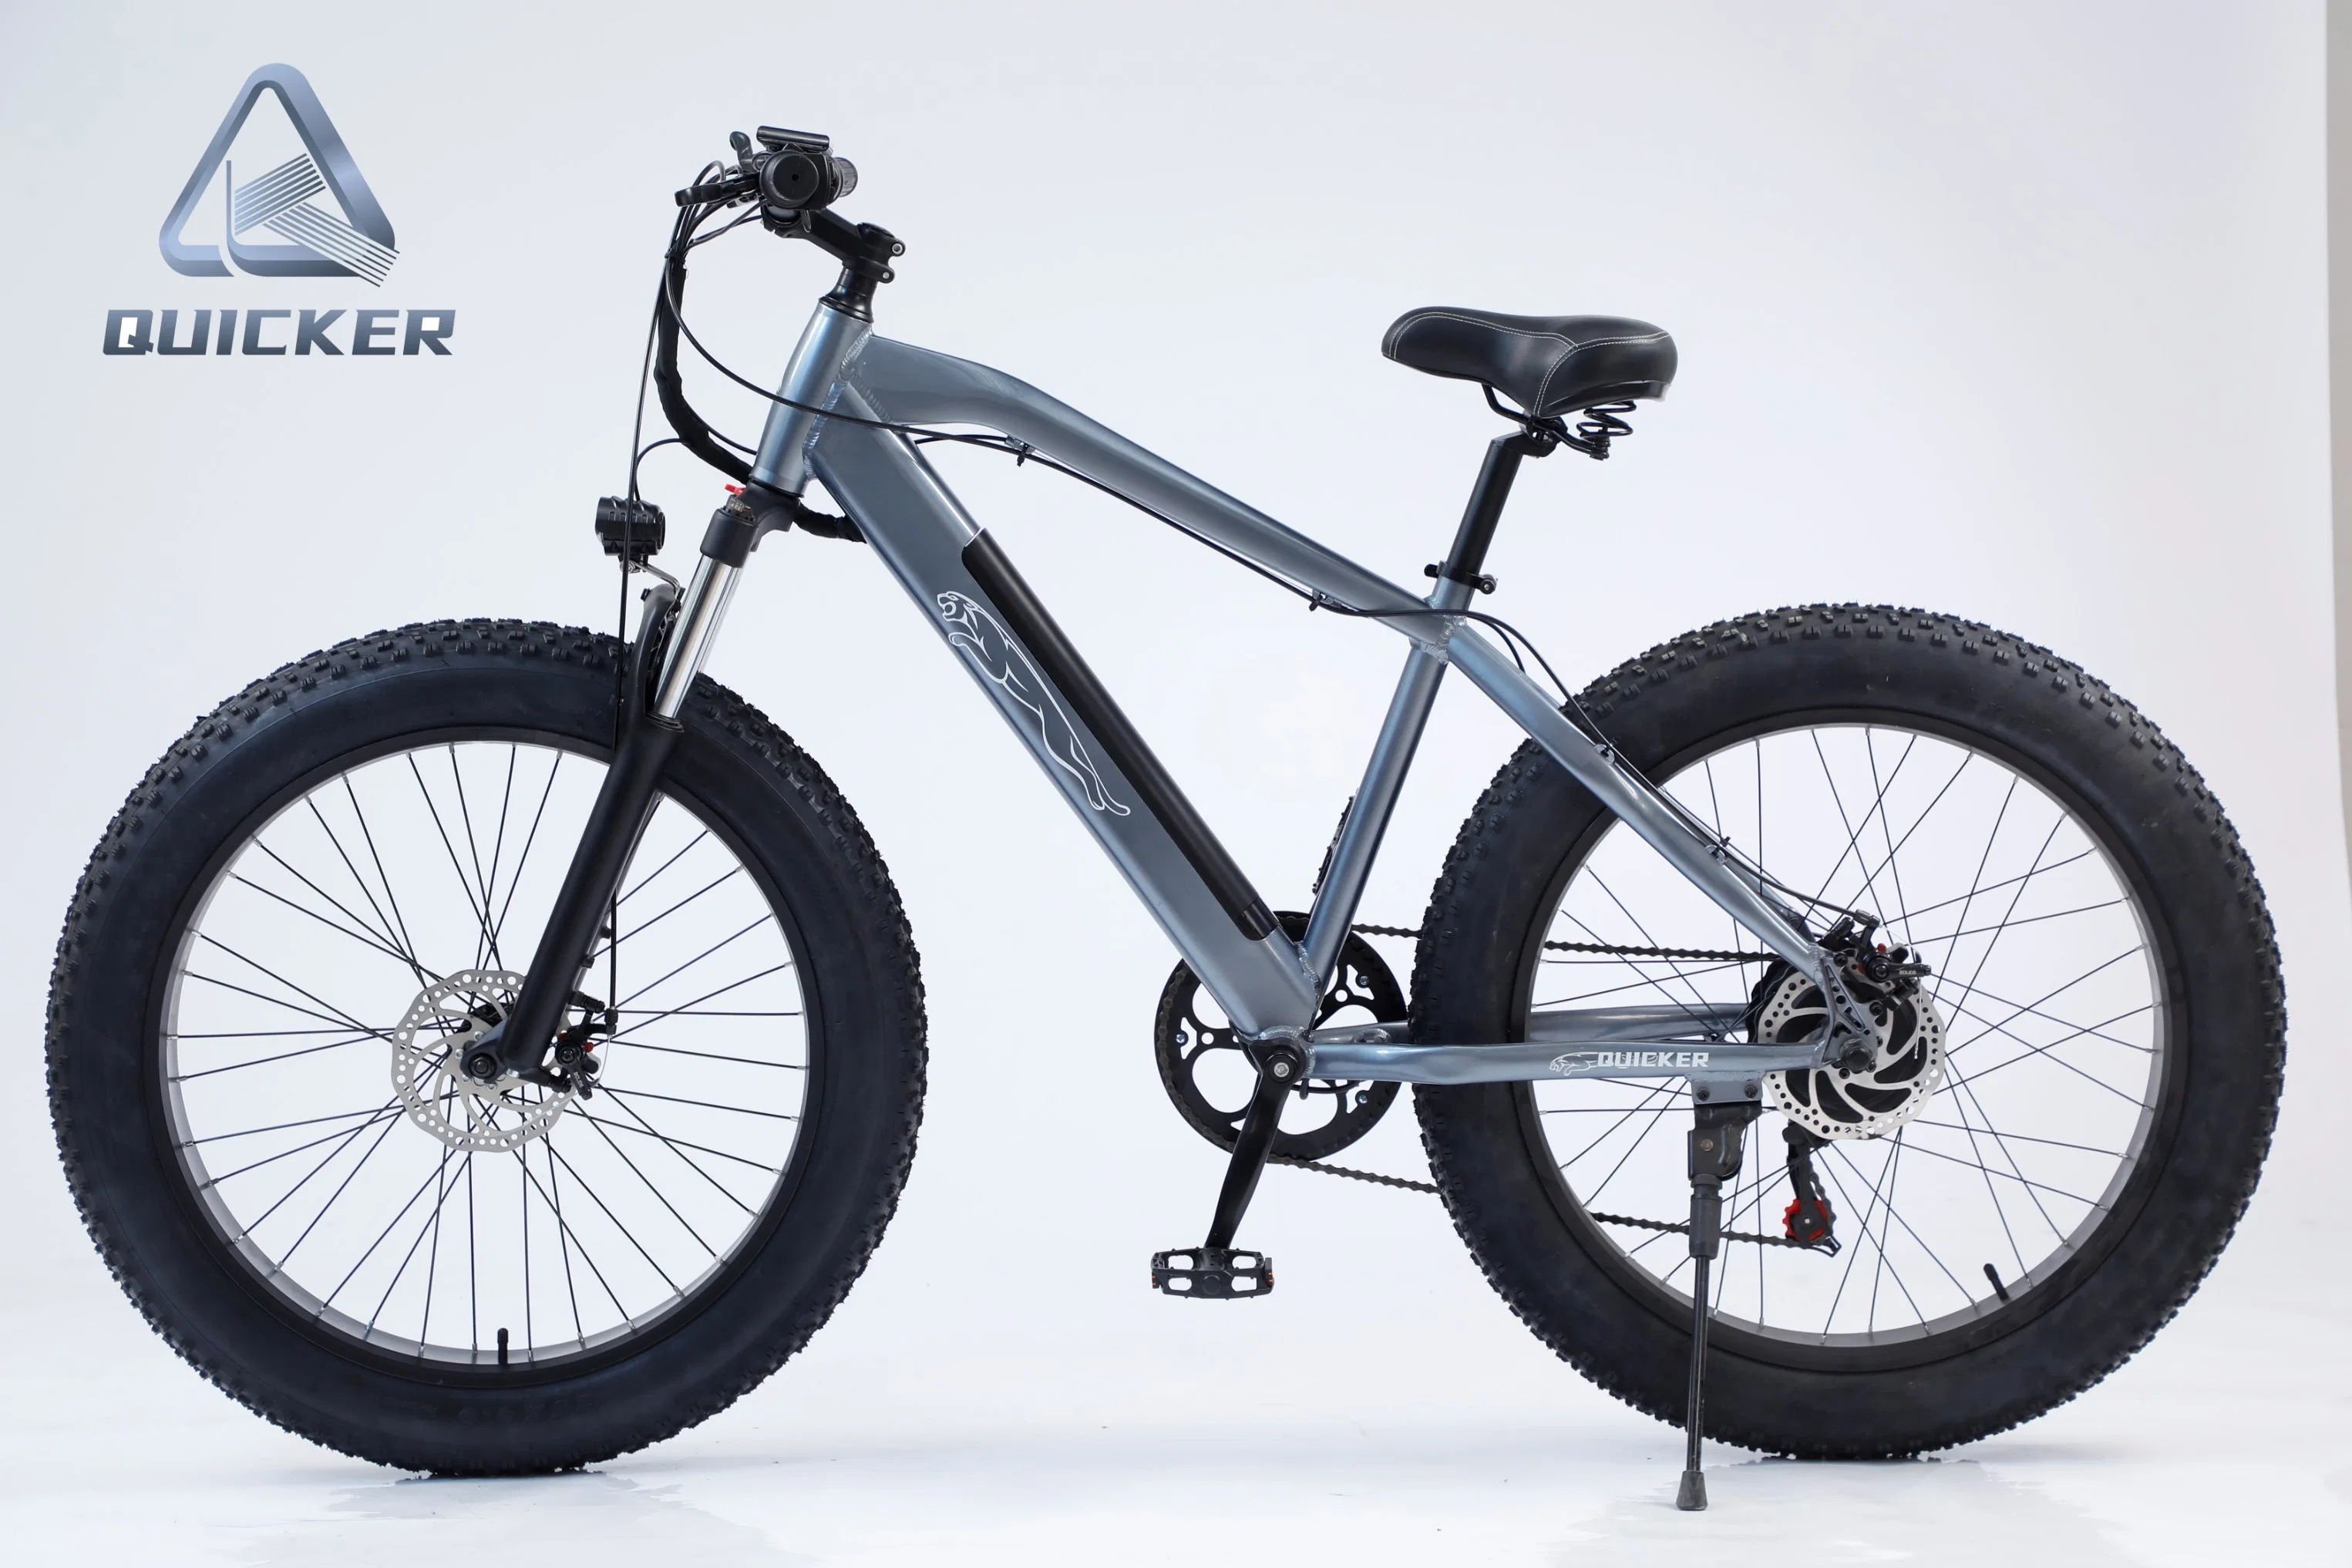 CE Aluminum Alloy Frame 12.8ah L G 21 Speed 26 Inch 48V 400W Mountain Electric Ebike Bicycle Electric Bike Electric Bicycle